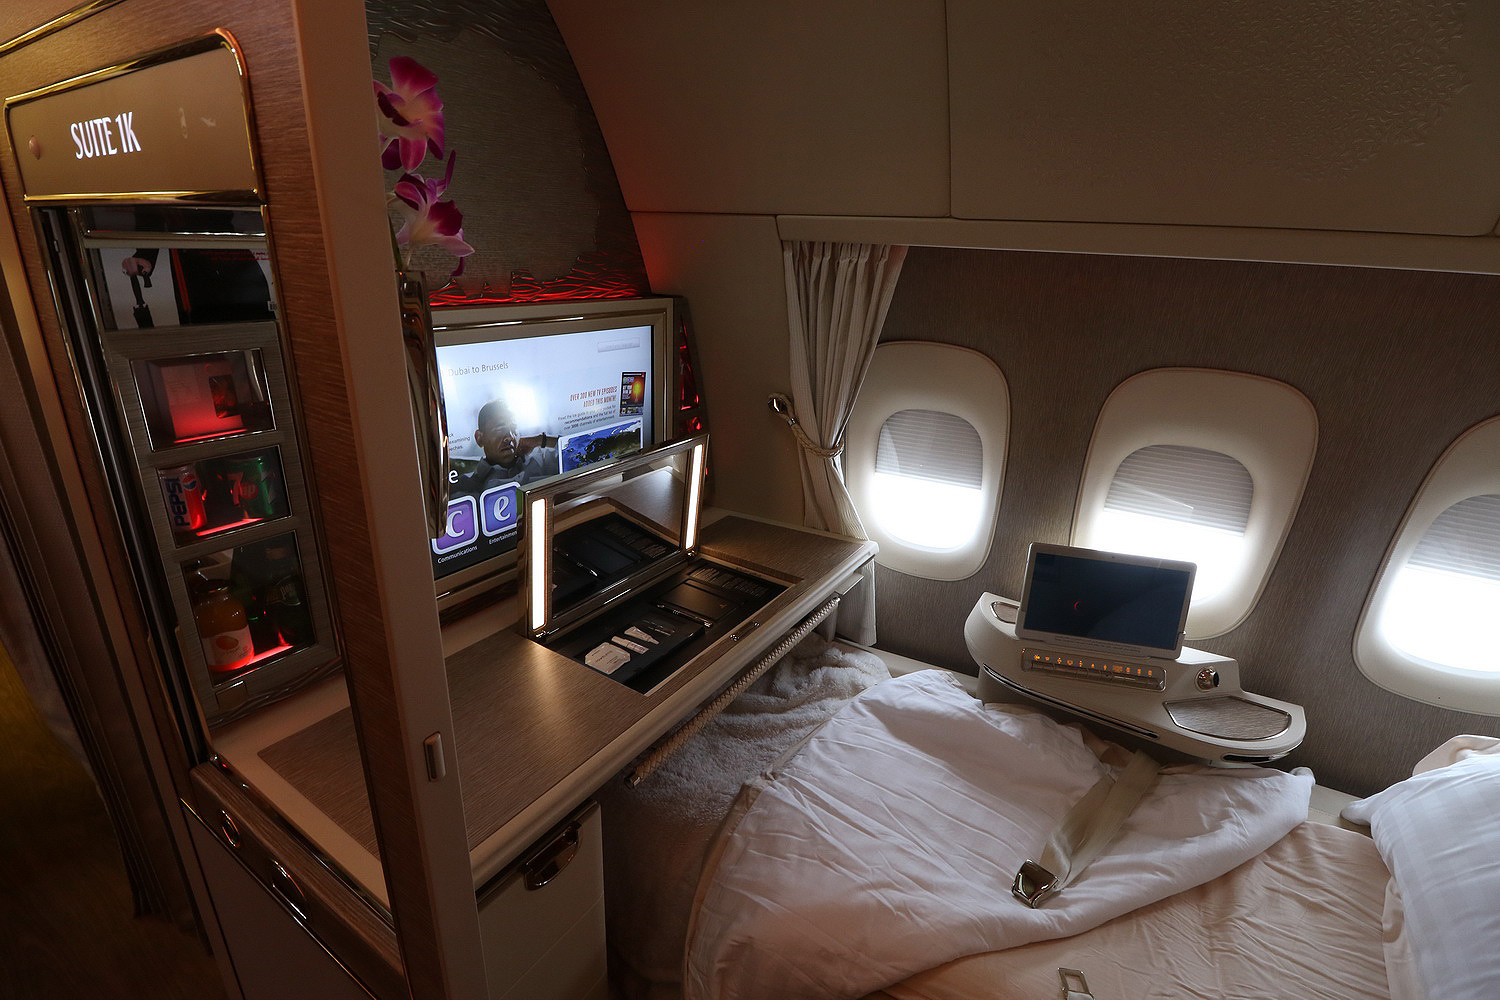 a bed with a laptop and a computer on it